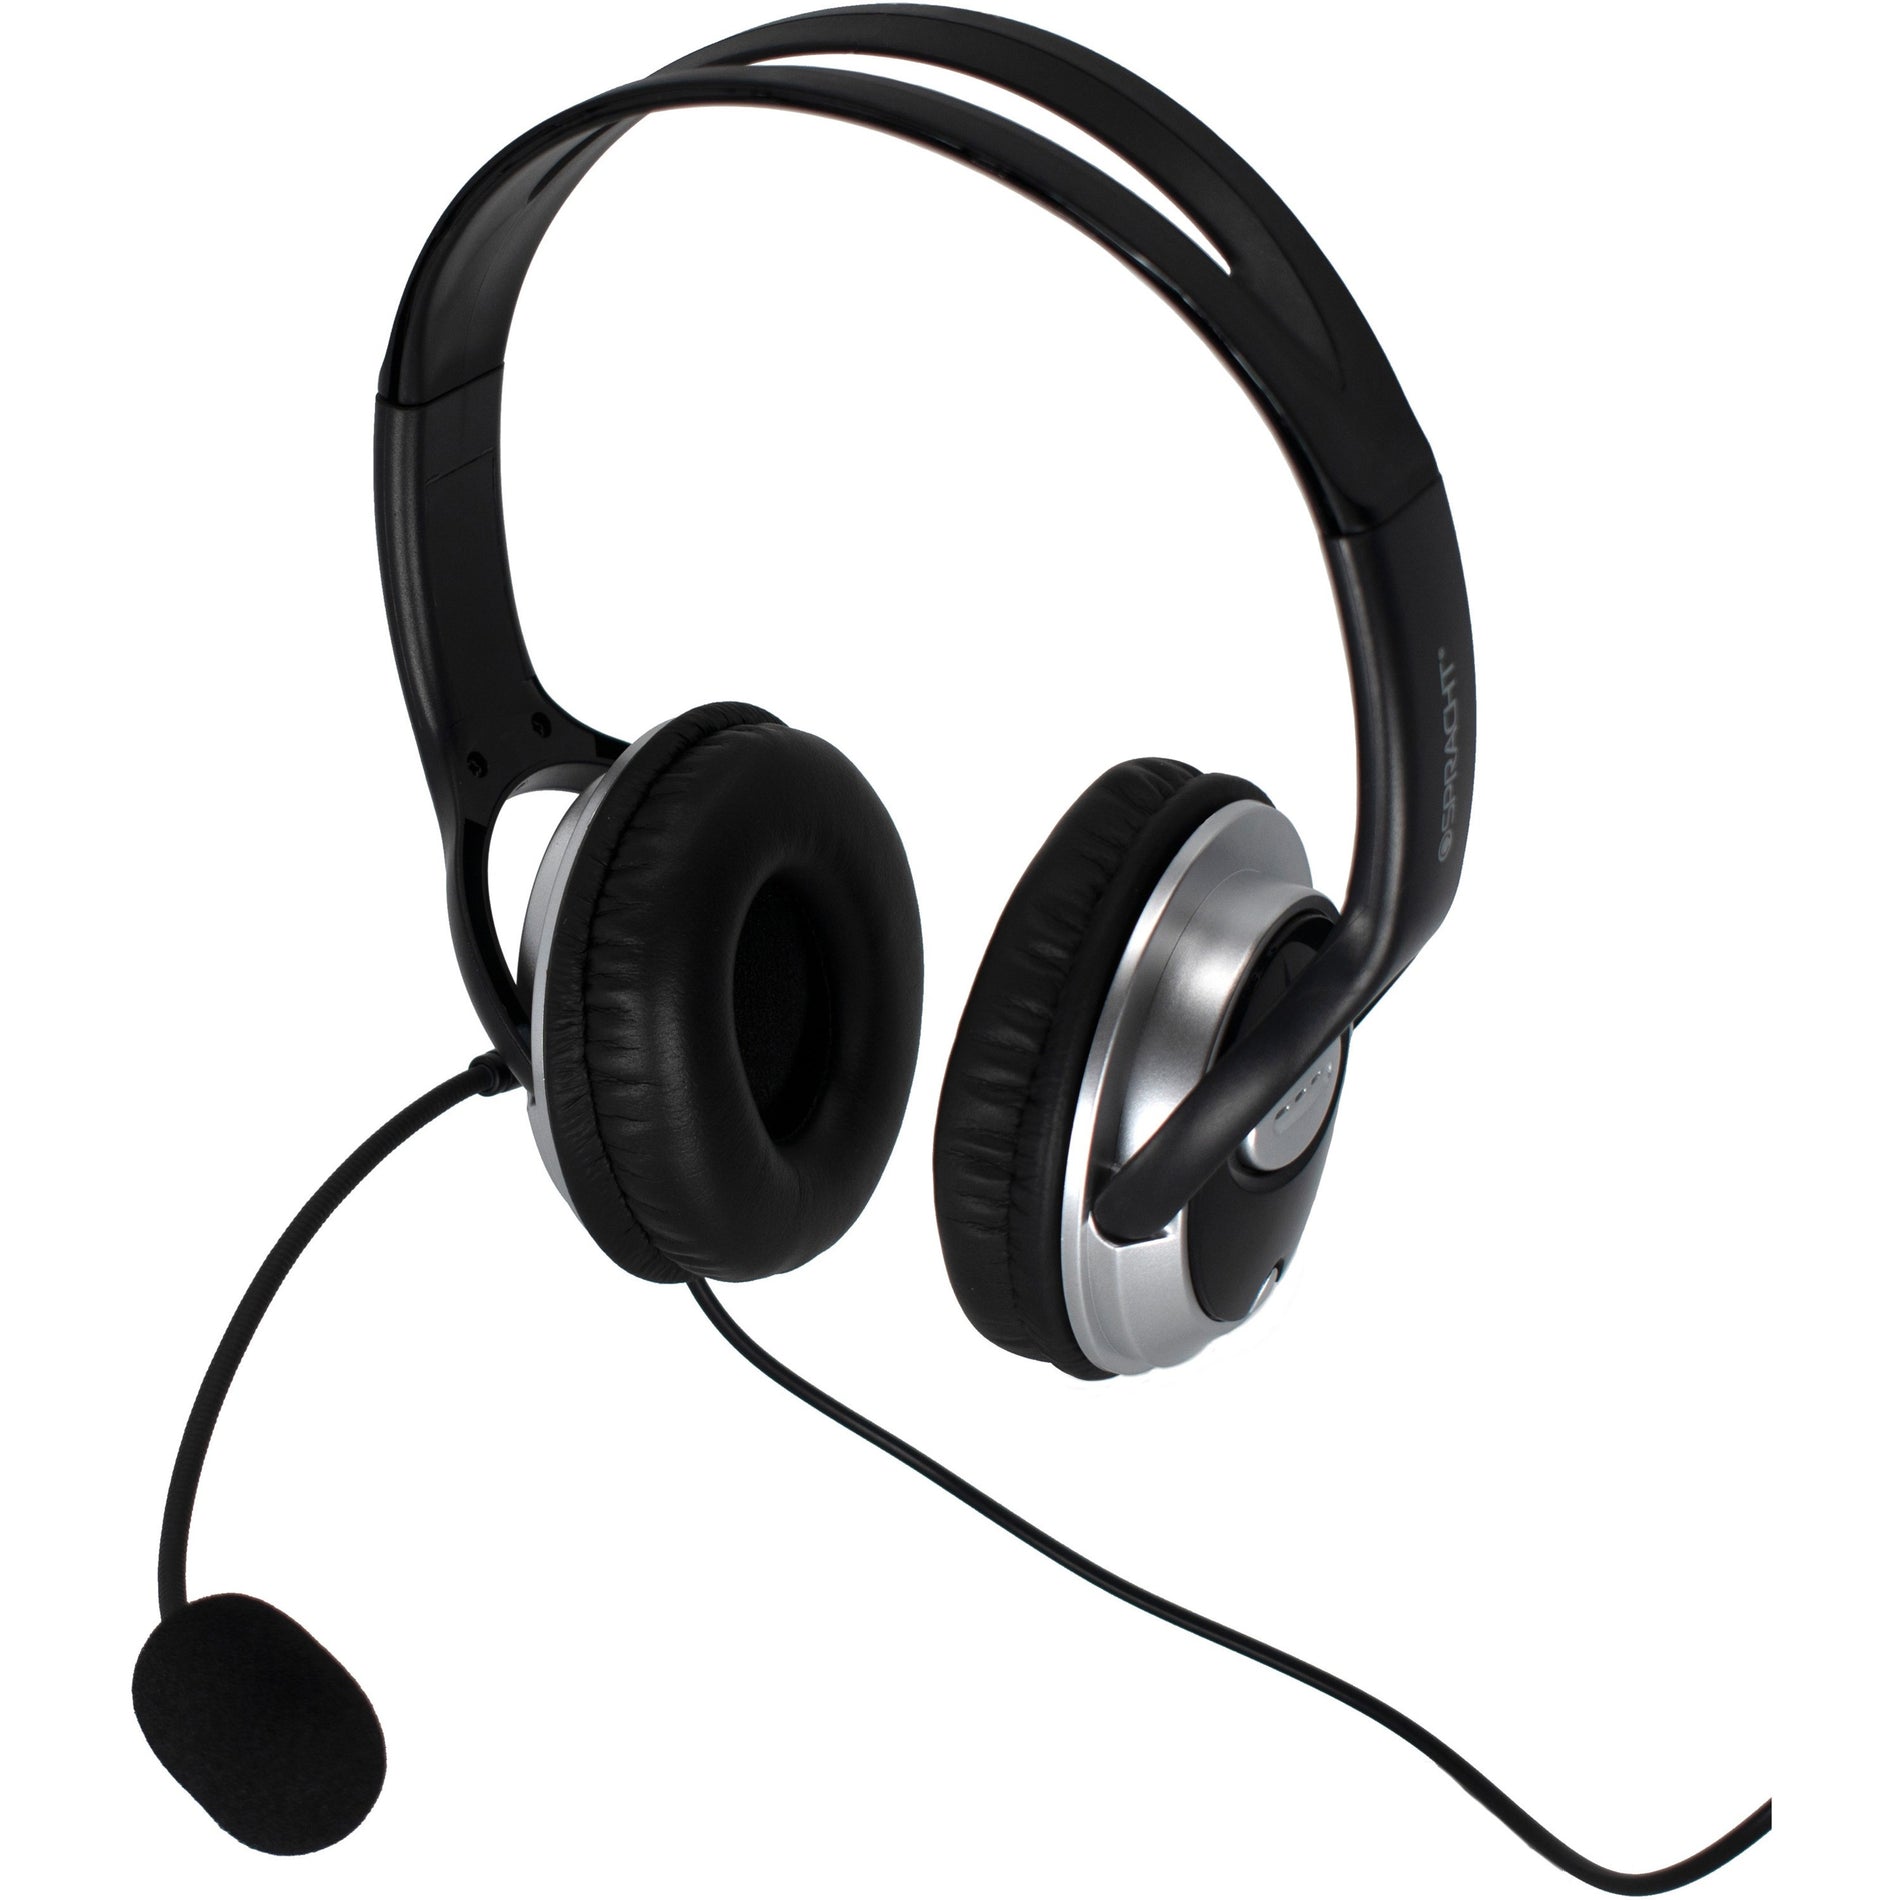 Spracht ZUM-WD-USB-2 Headset, Comfortable, Noise Cancelling, USB Wired Stereo Headset